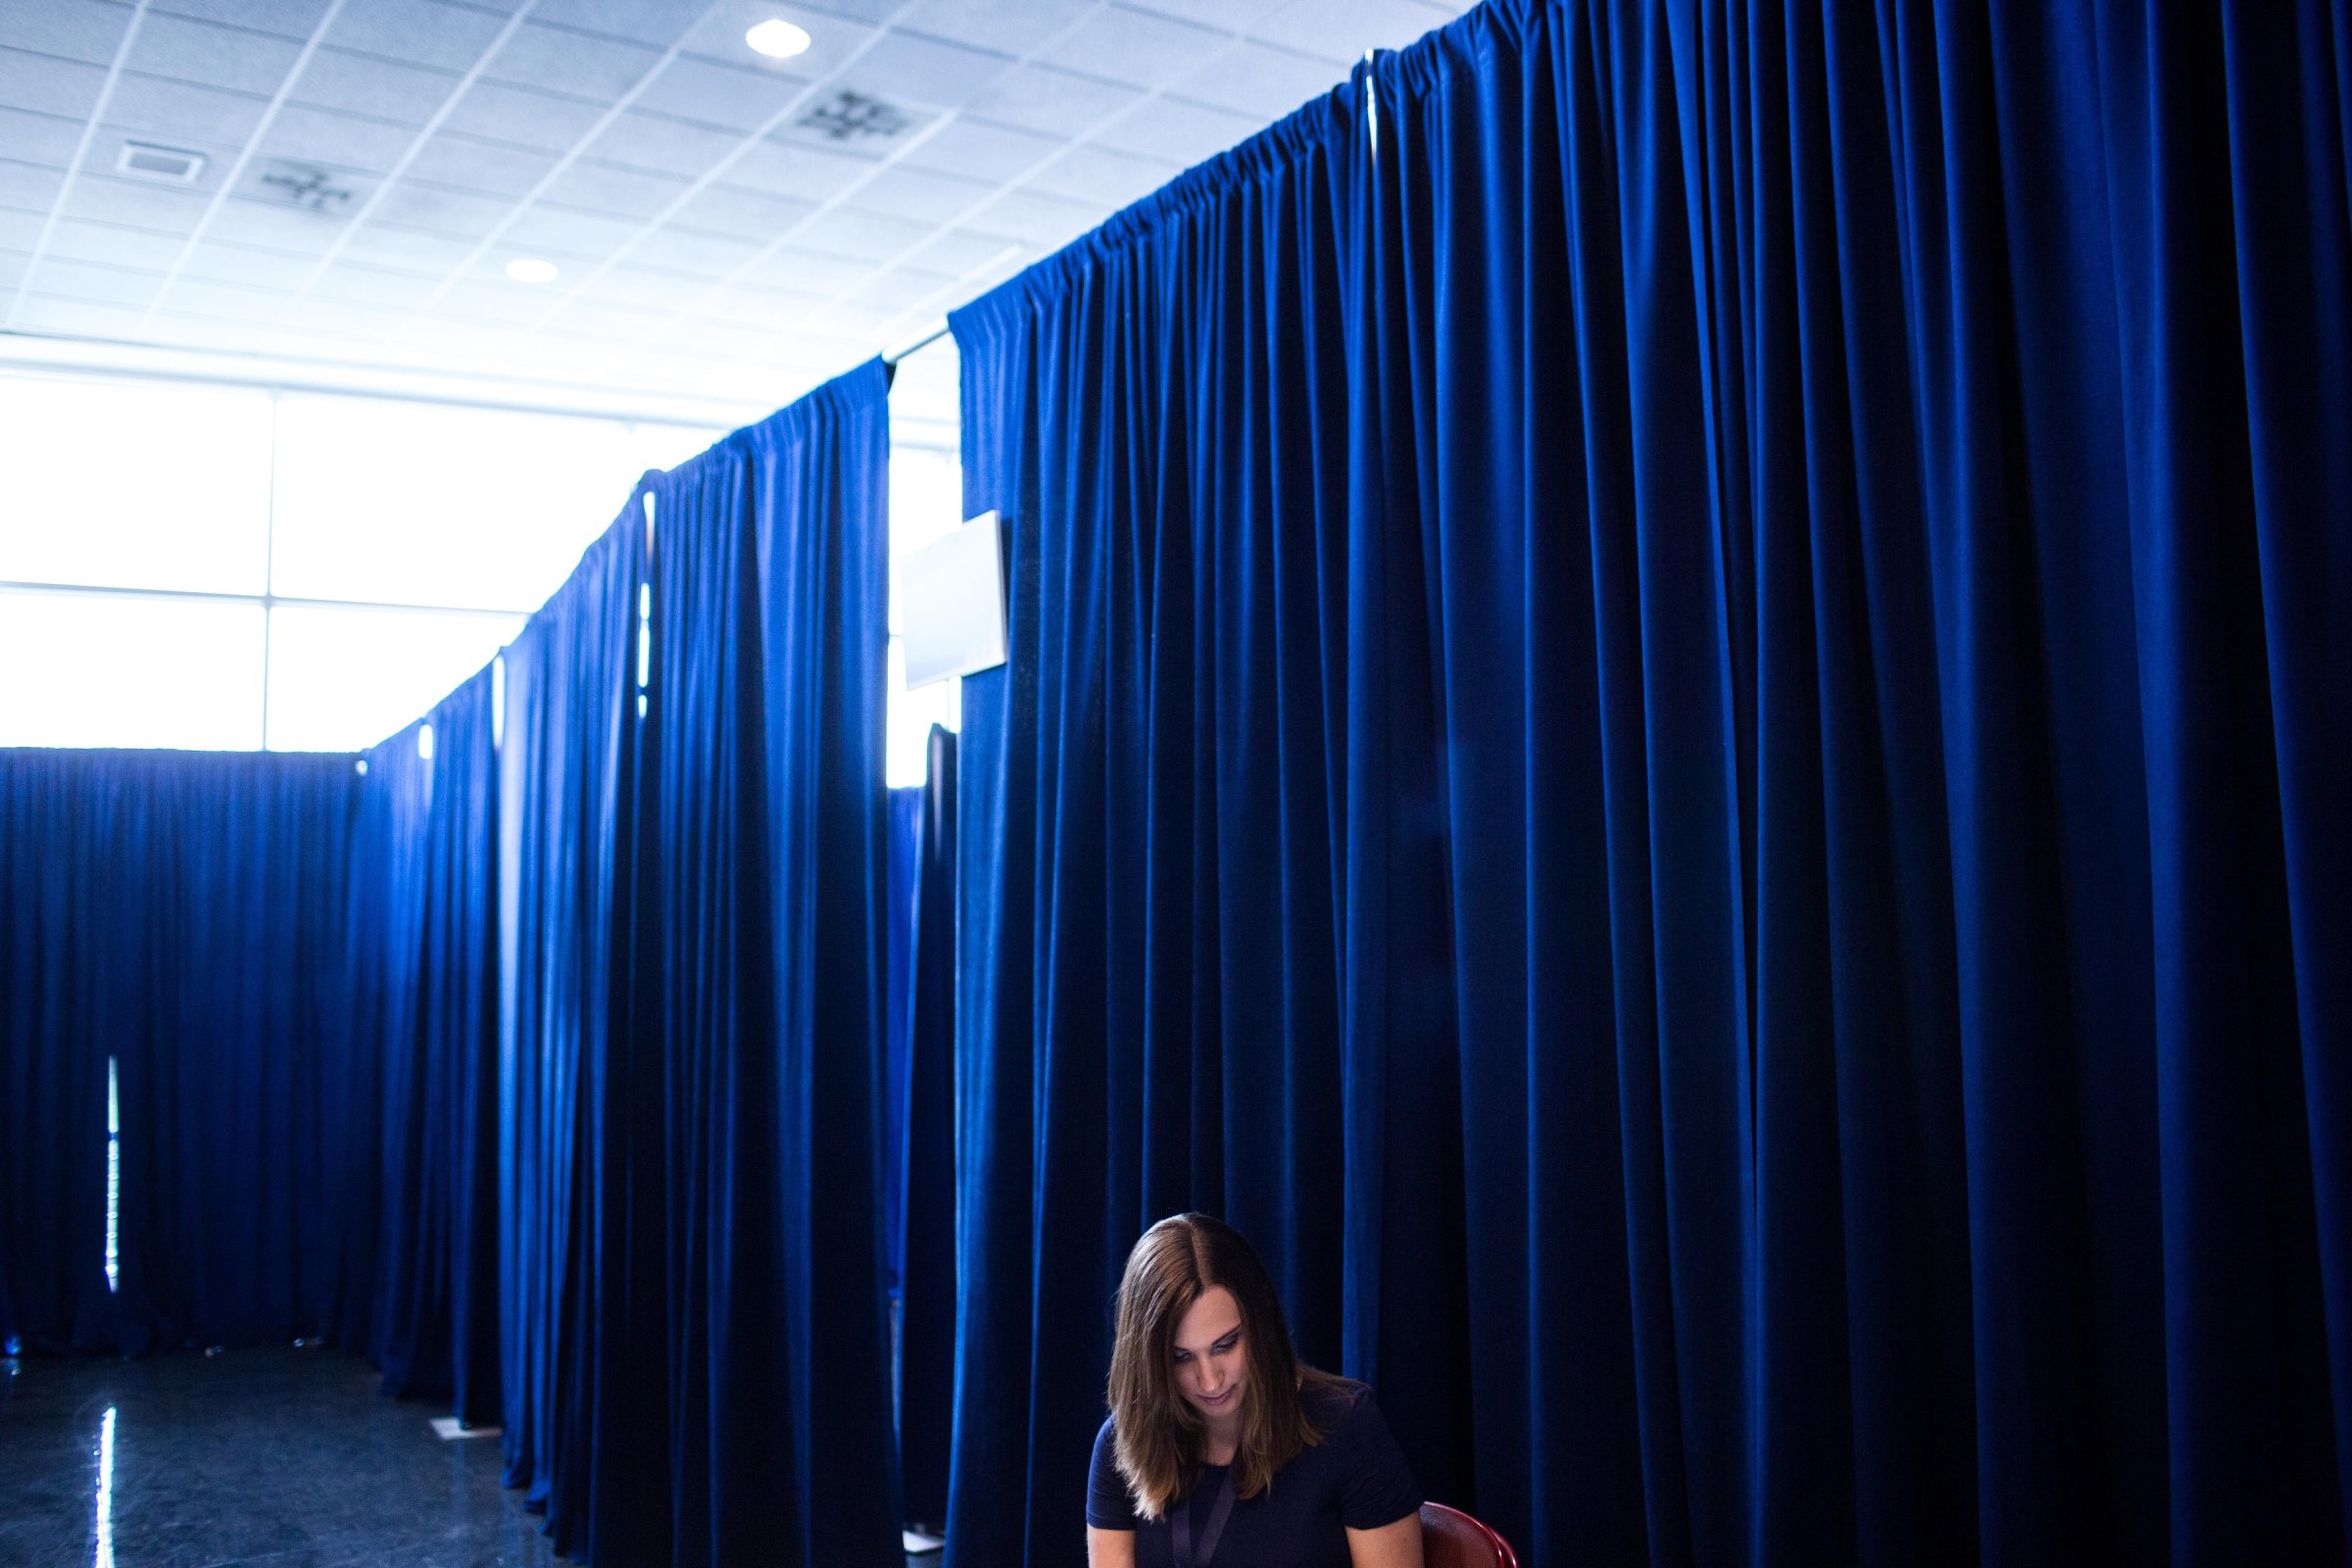 Sarah McBride sets up press meetings on her phone at the Wells Fargo Center where she is attending Democratic National Convention on July 25, 2016 in Philadelphia.(Natalie Keyssar for TIME)